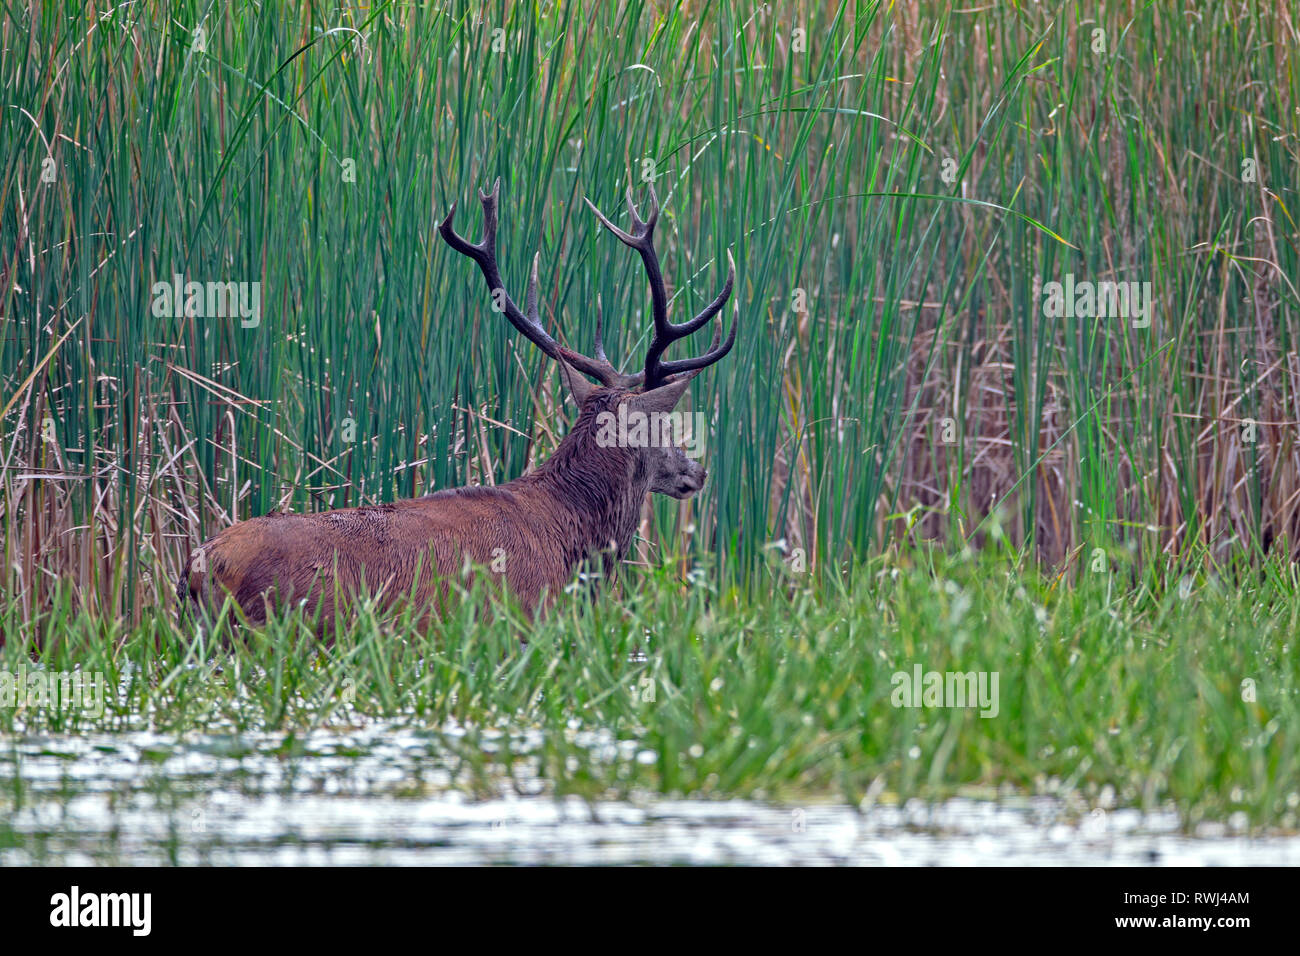 Red Deer (Cervus elaphus). Stag standing in water in front of reed. Saxony, Germany Stock Photo